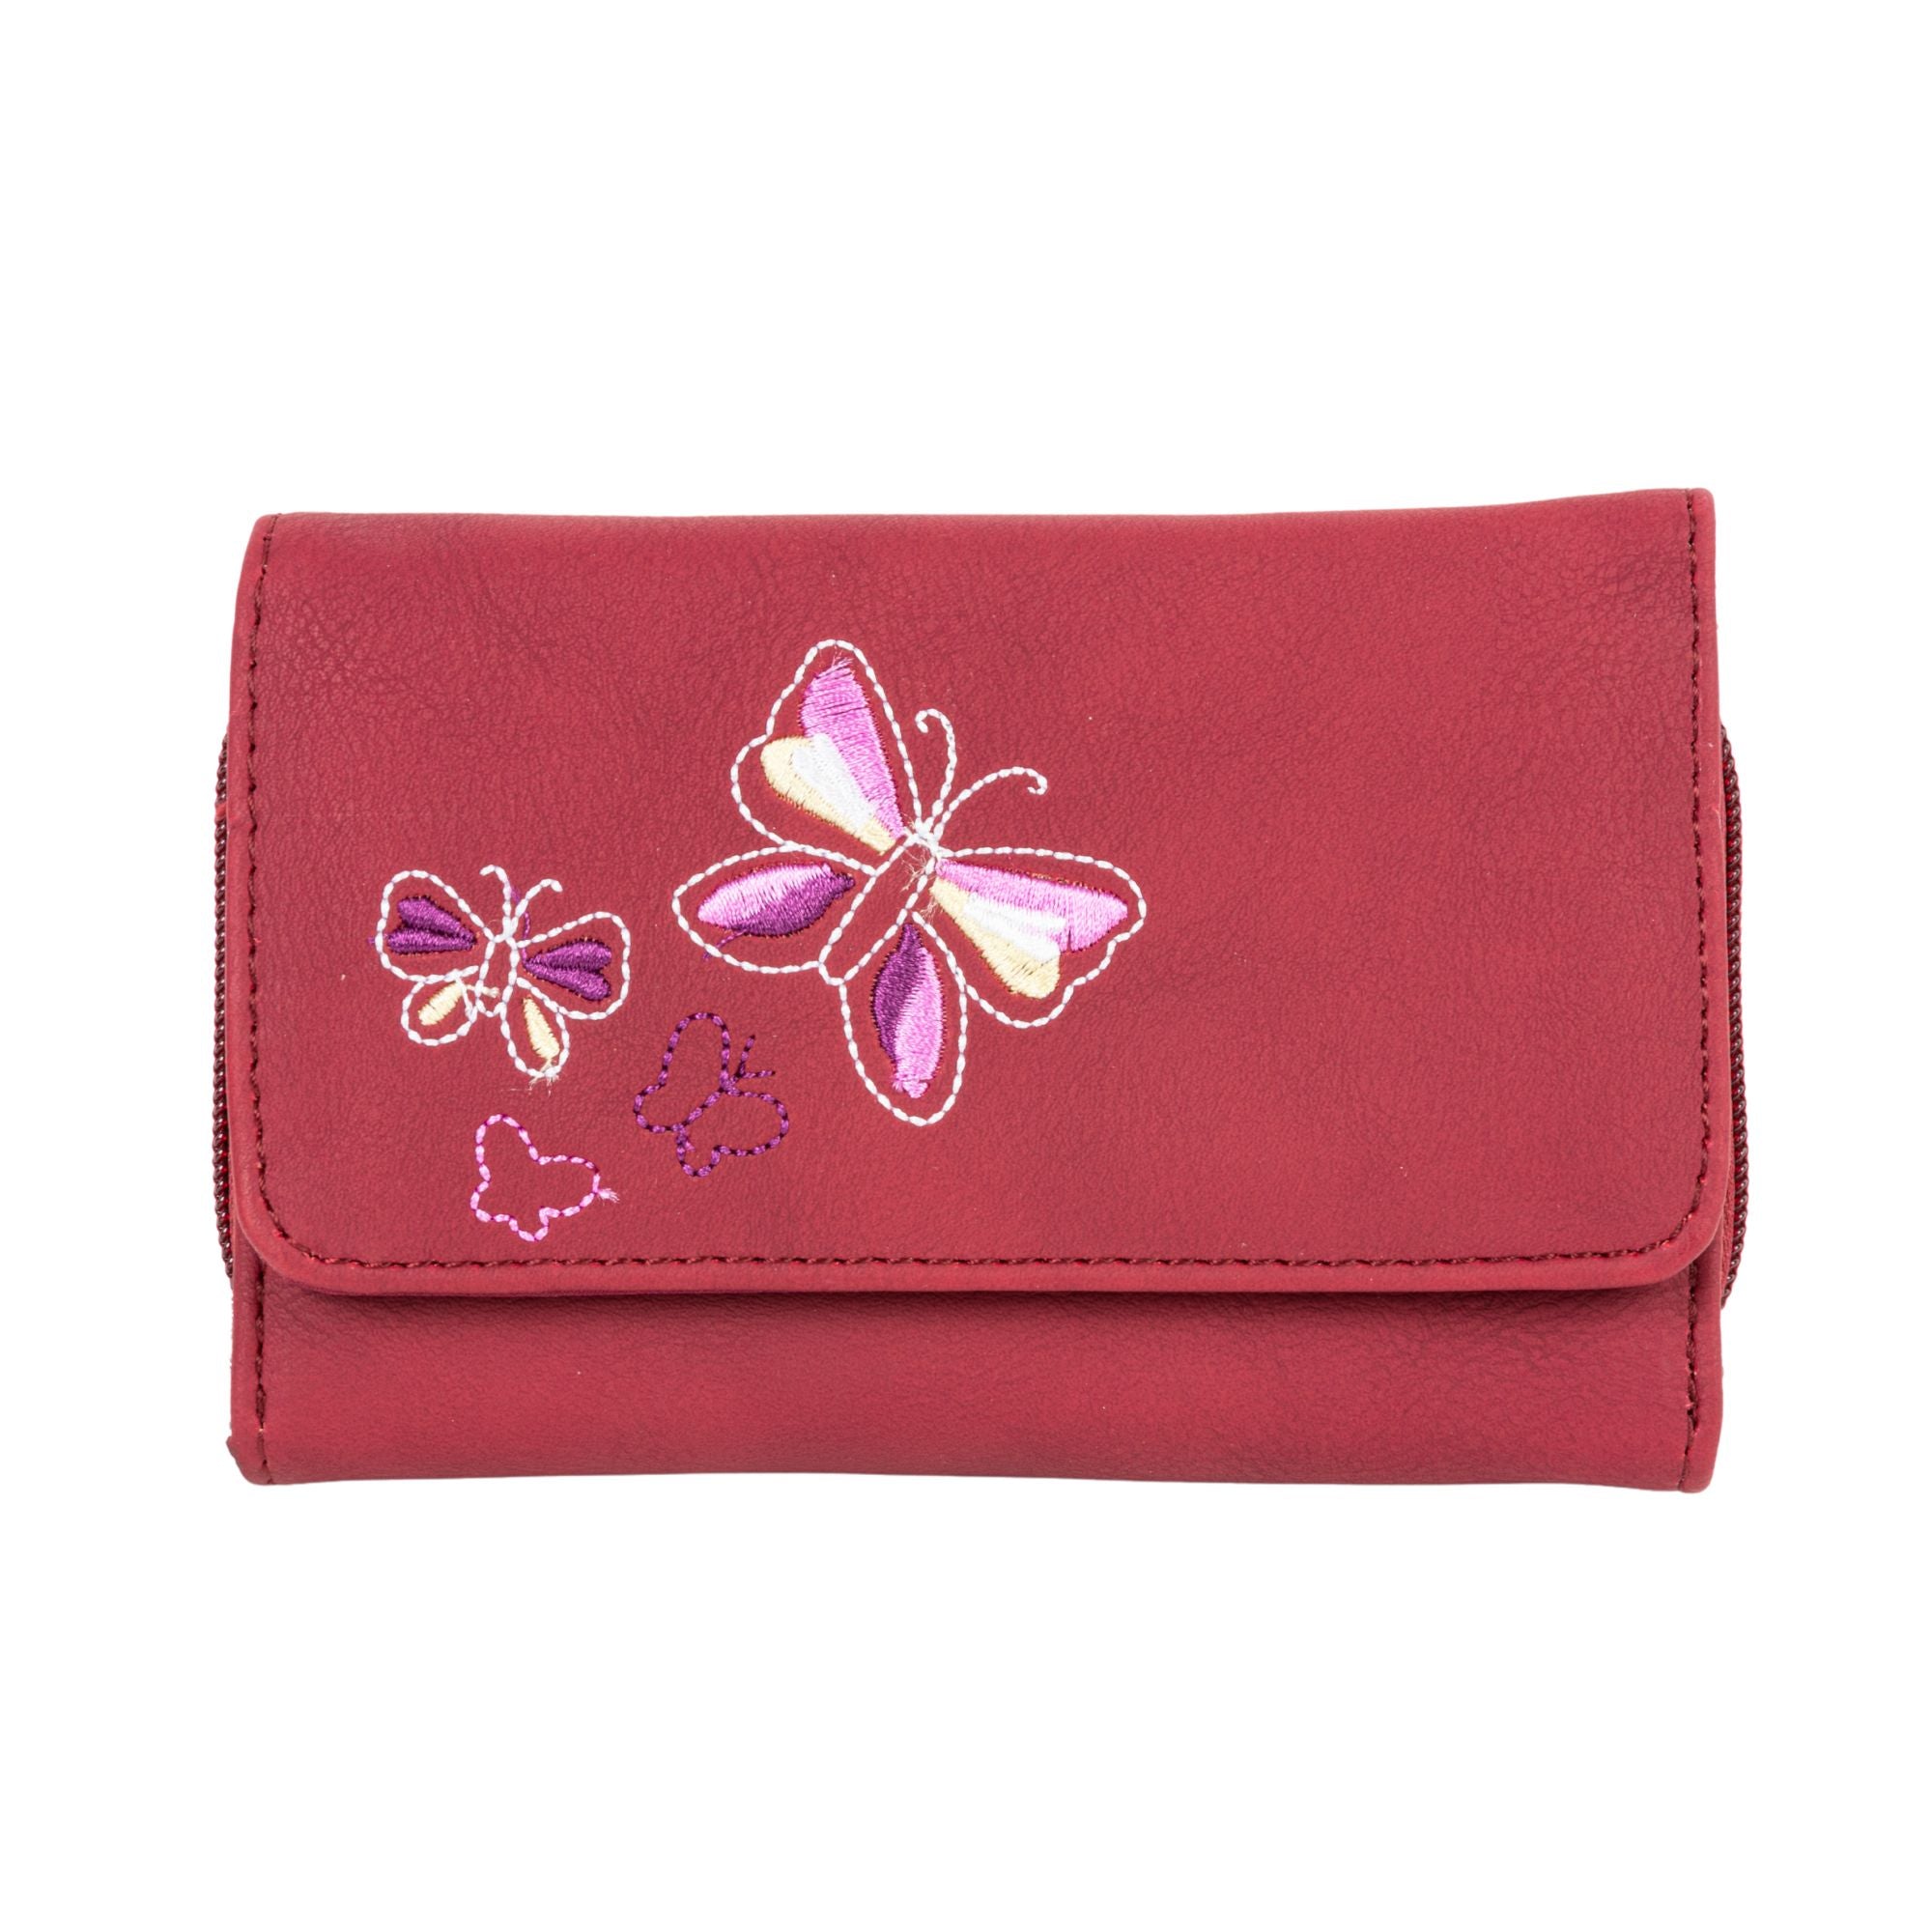 Red Purse (Butterfly Design) - DSL